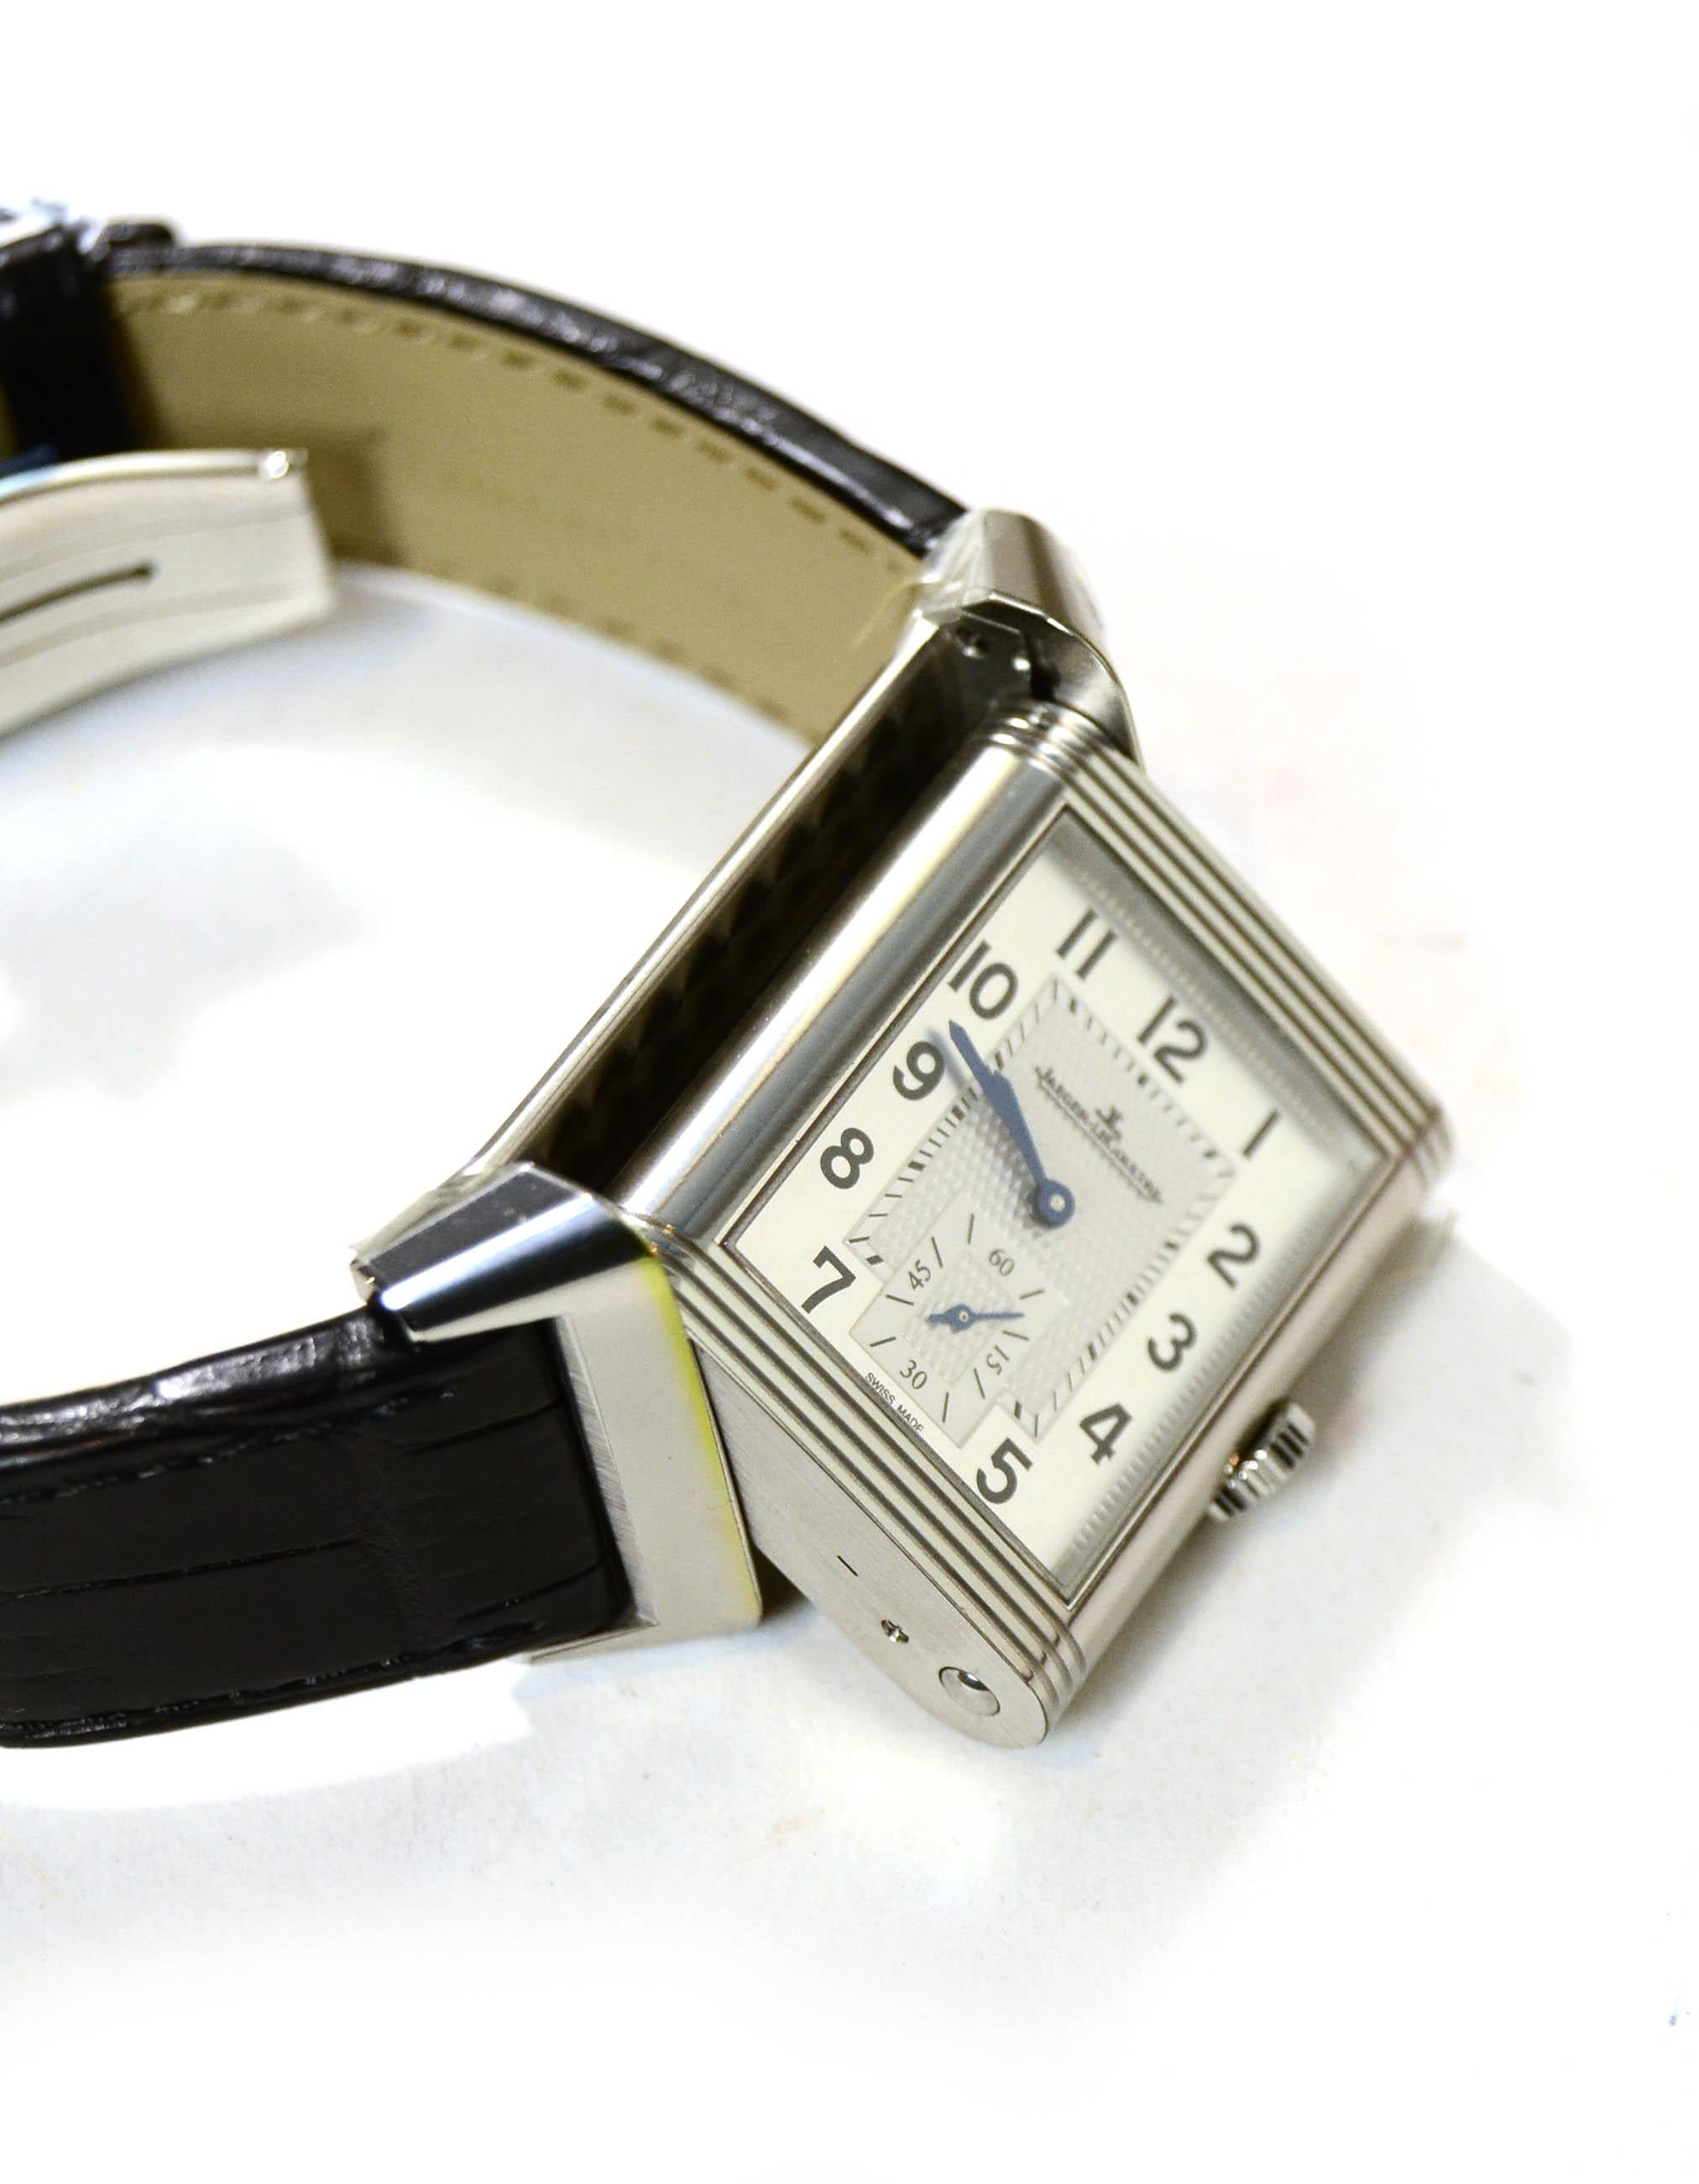 Jaeger-LeCoultre Reverso Classic Large Duoface Hand-Wound 28mm Watch rt. $9, 100 1